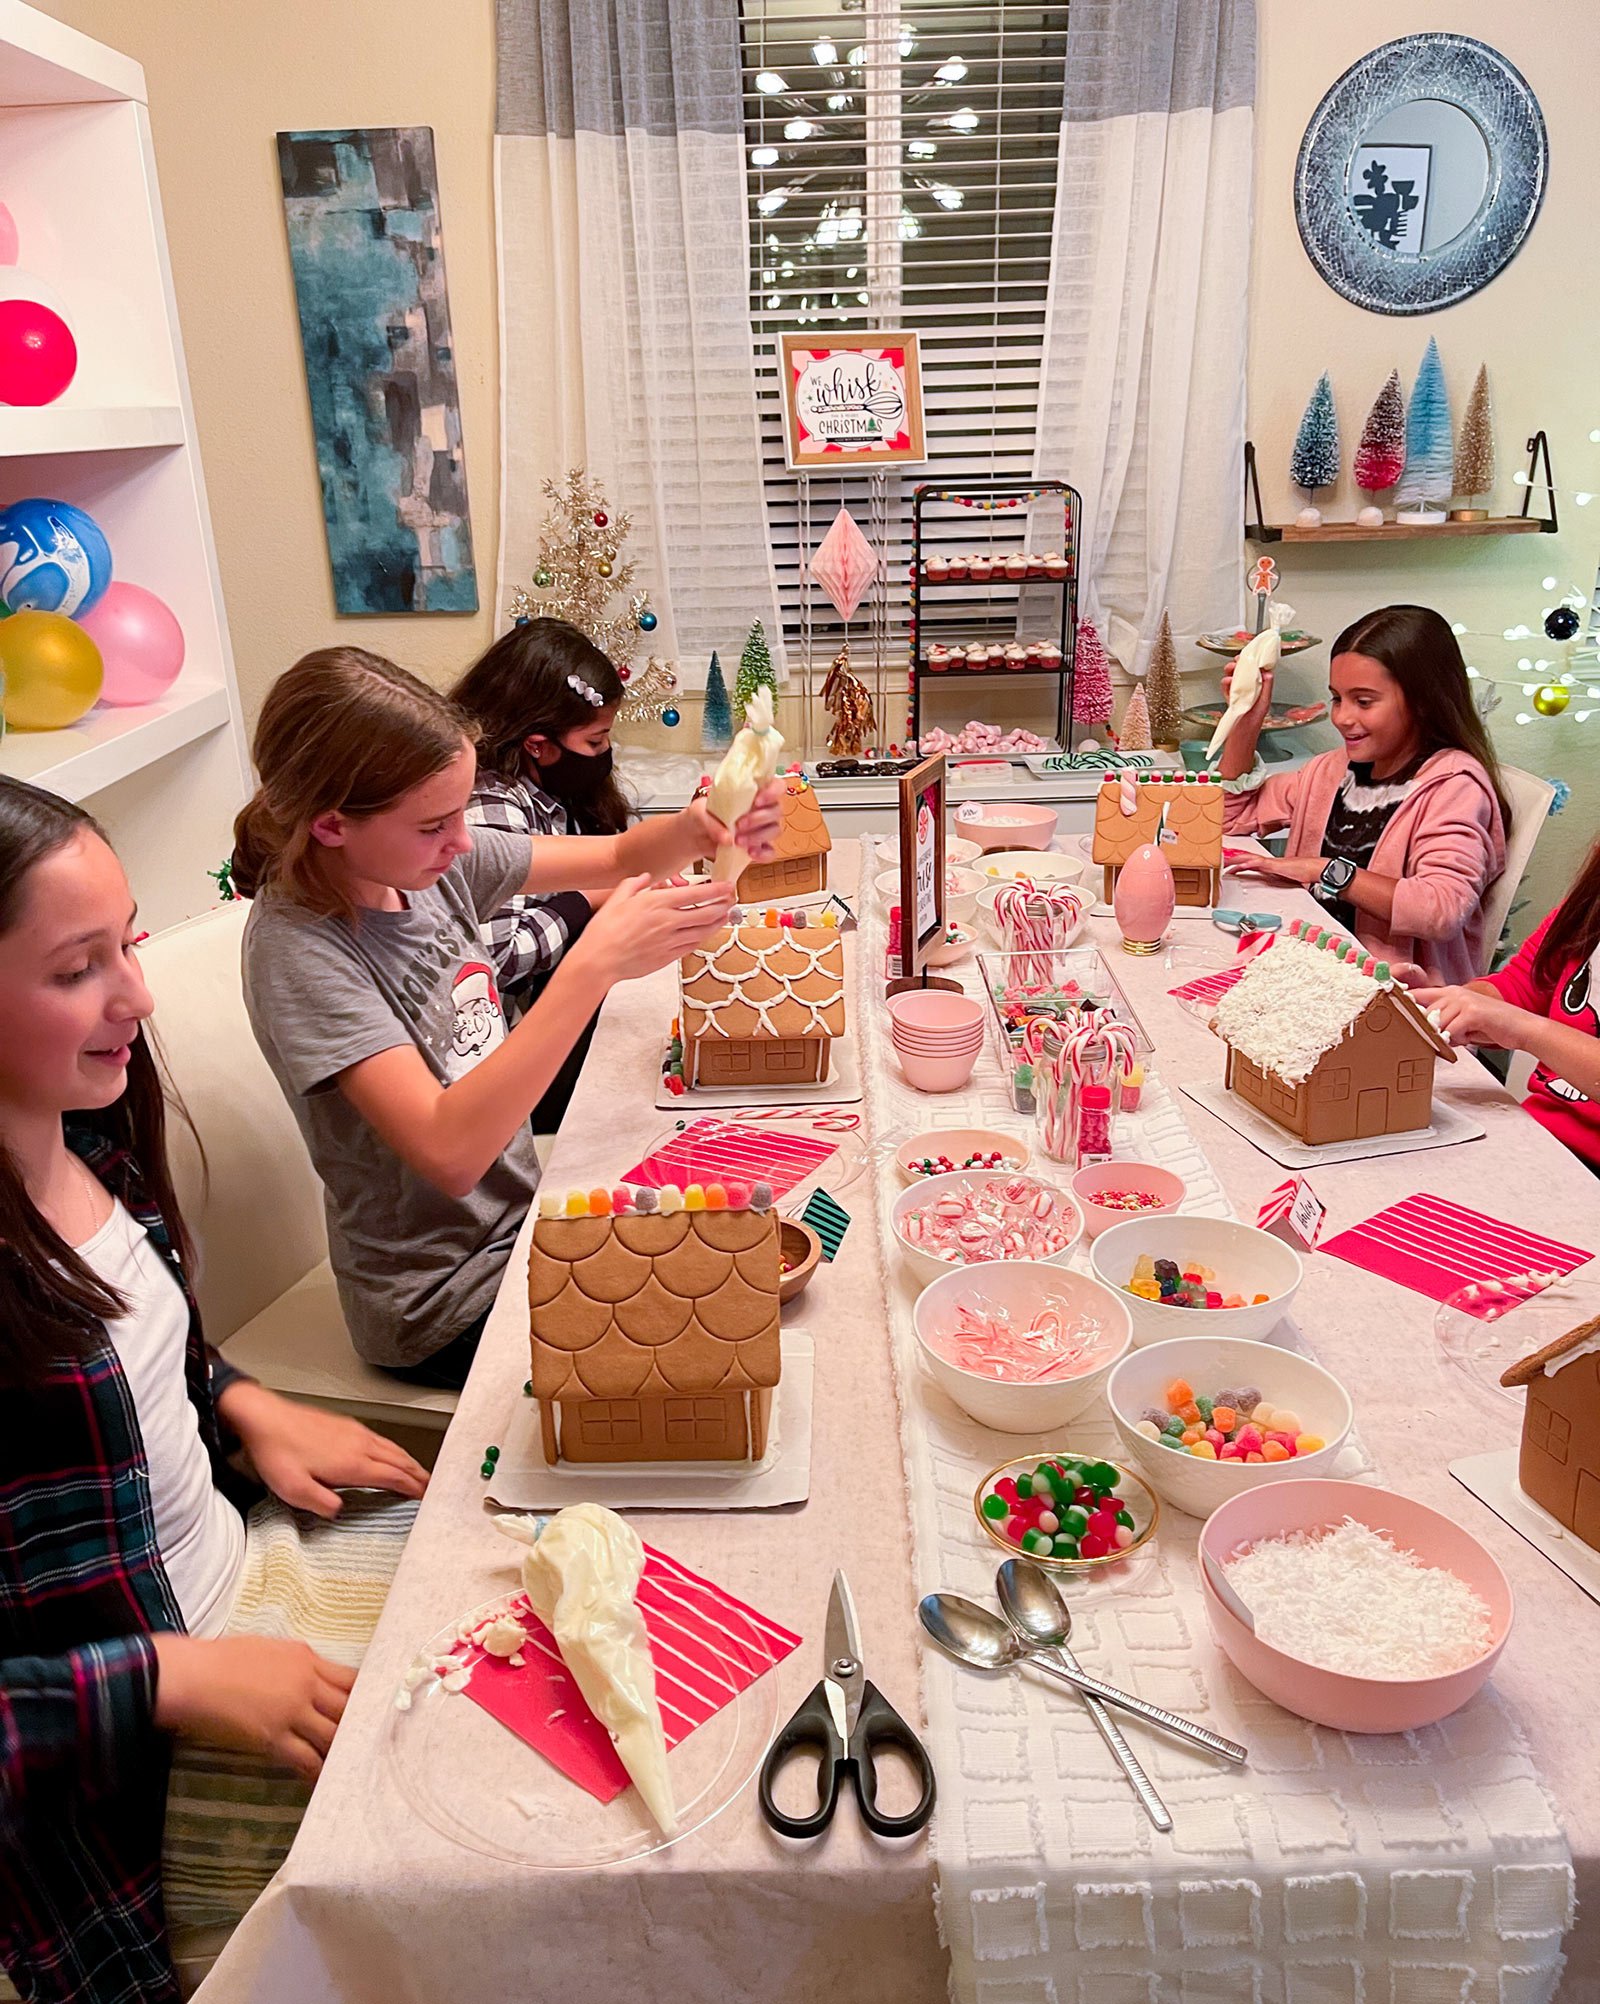 kids decorating gingerbread houses